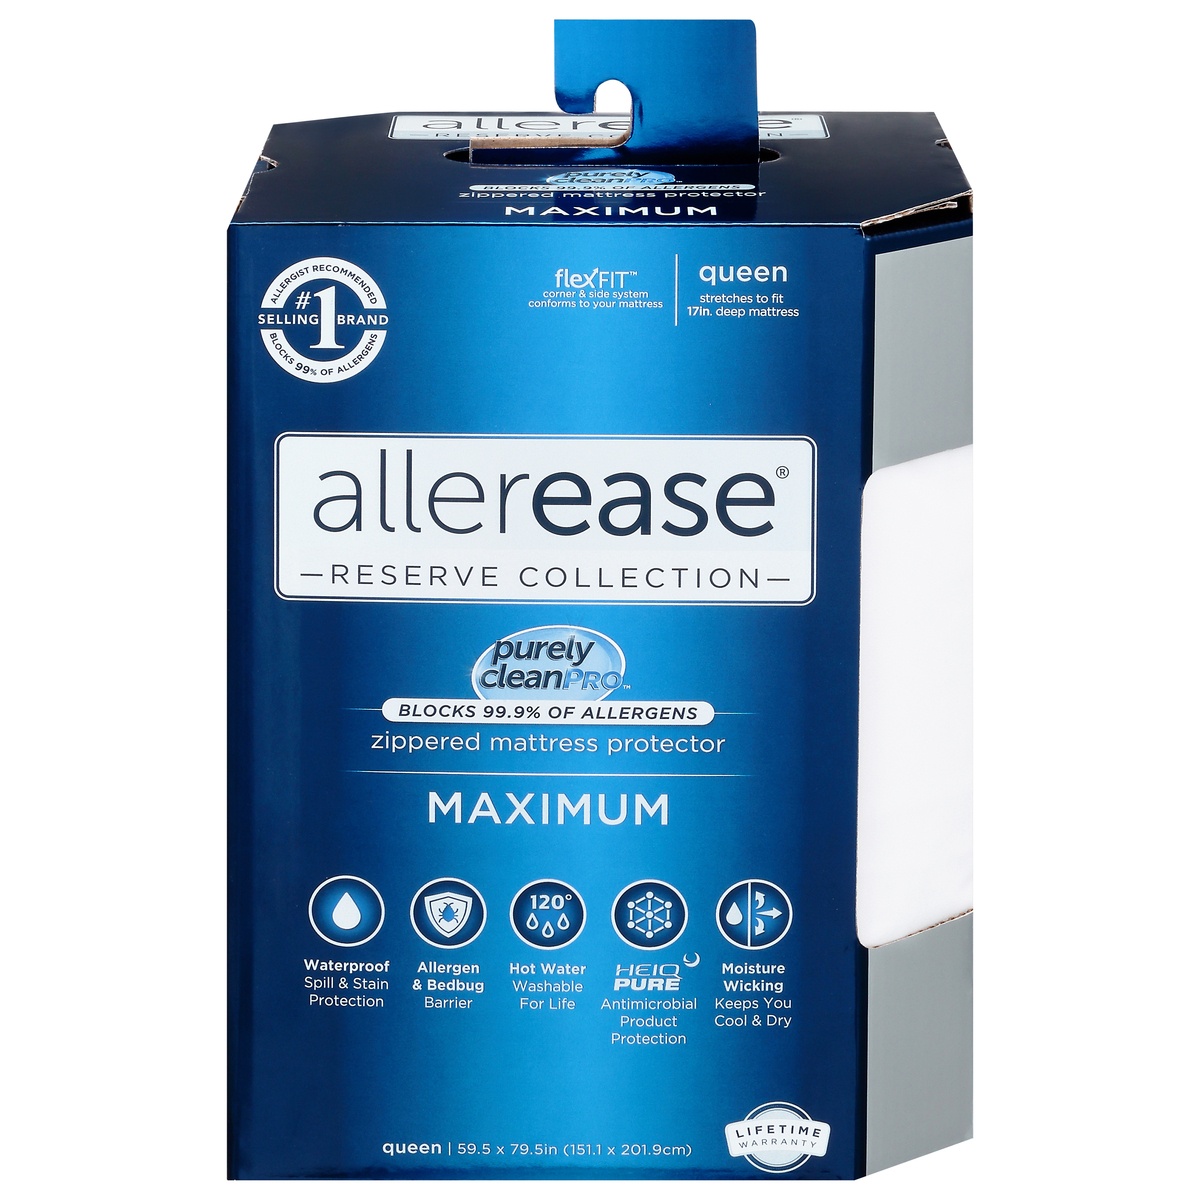 AllerEase Waterproof Allergy Protection Zippered Mattress Protector